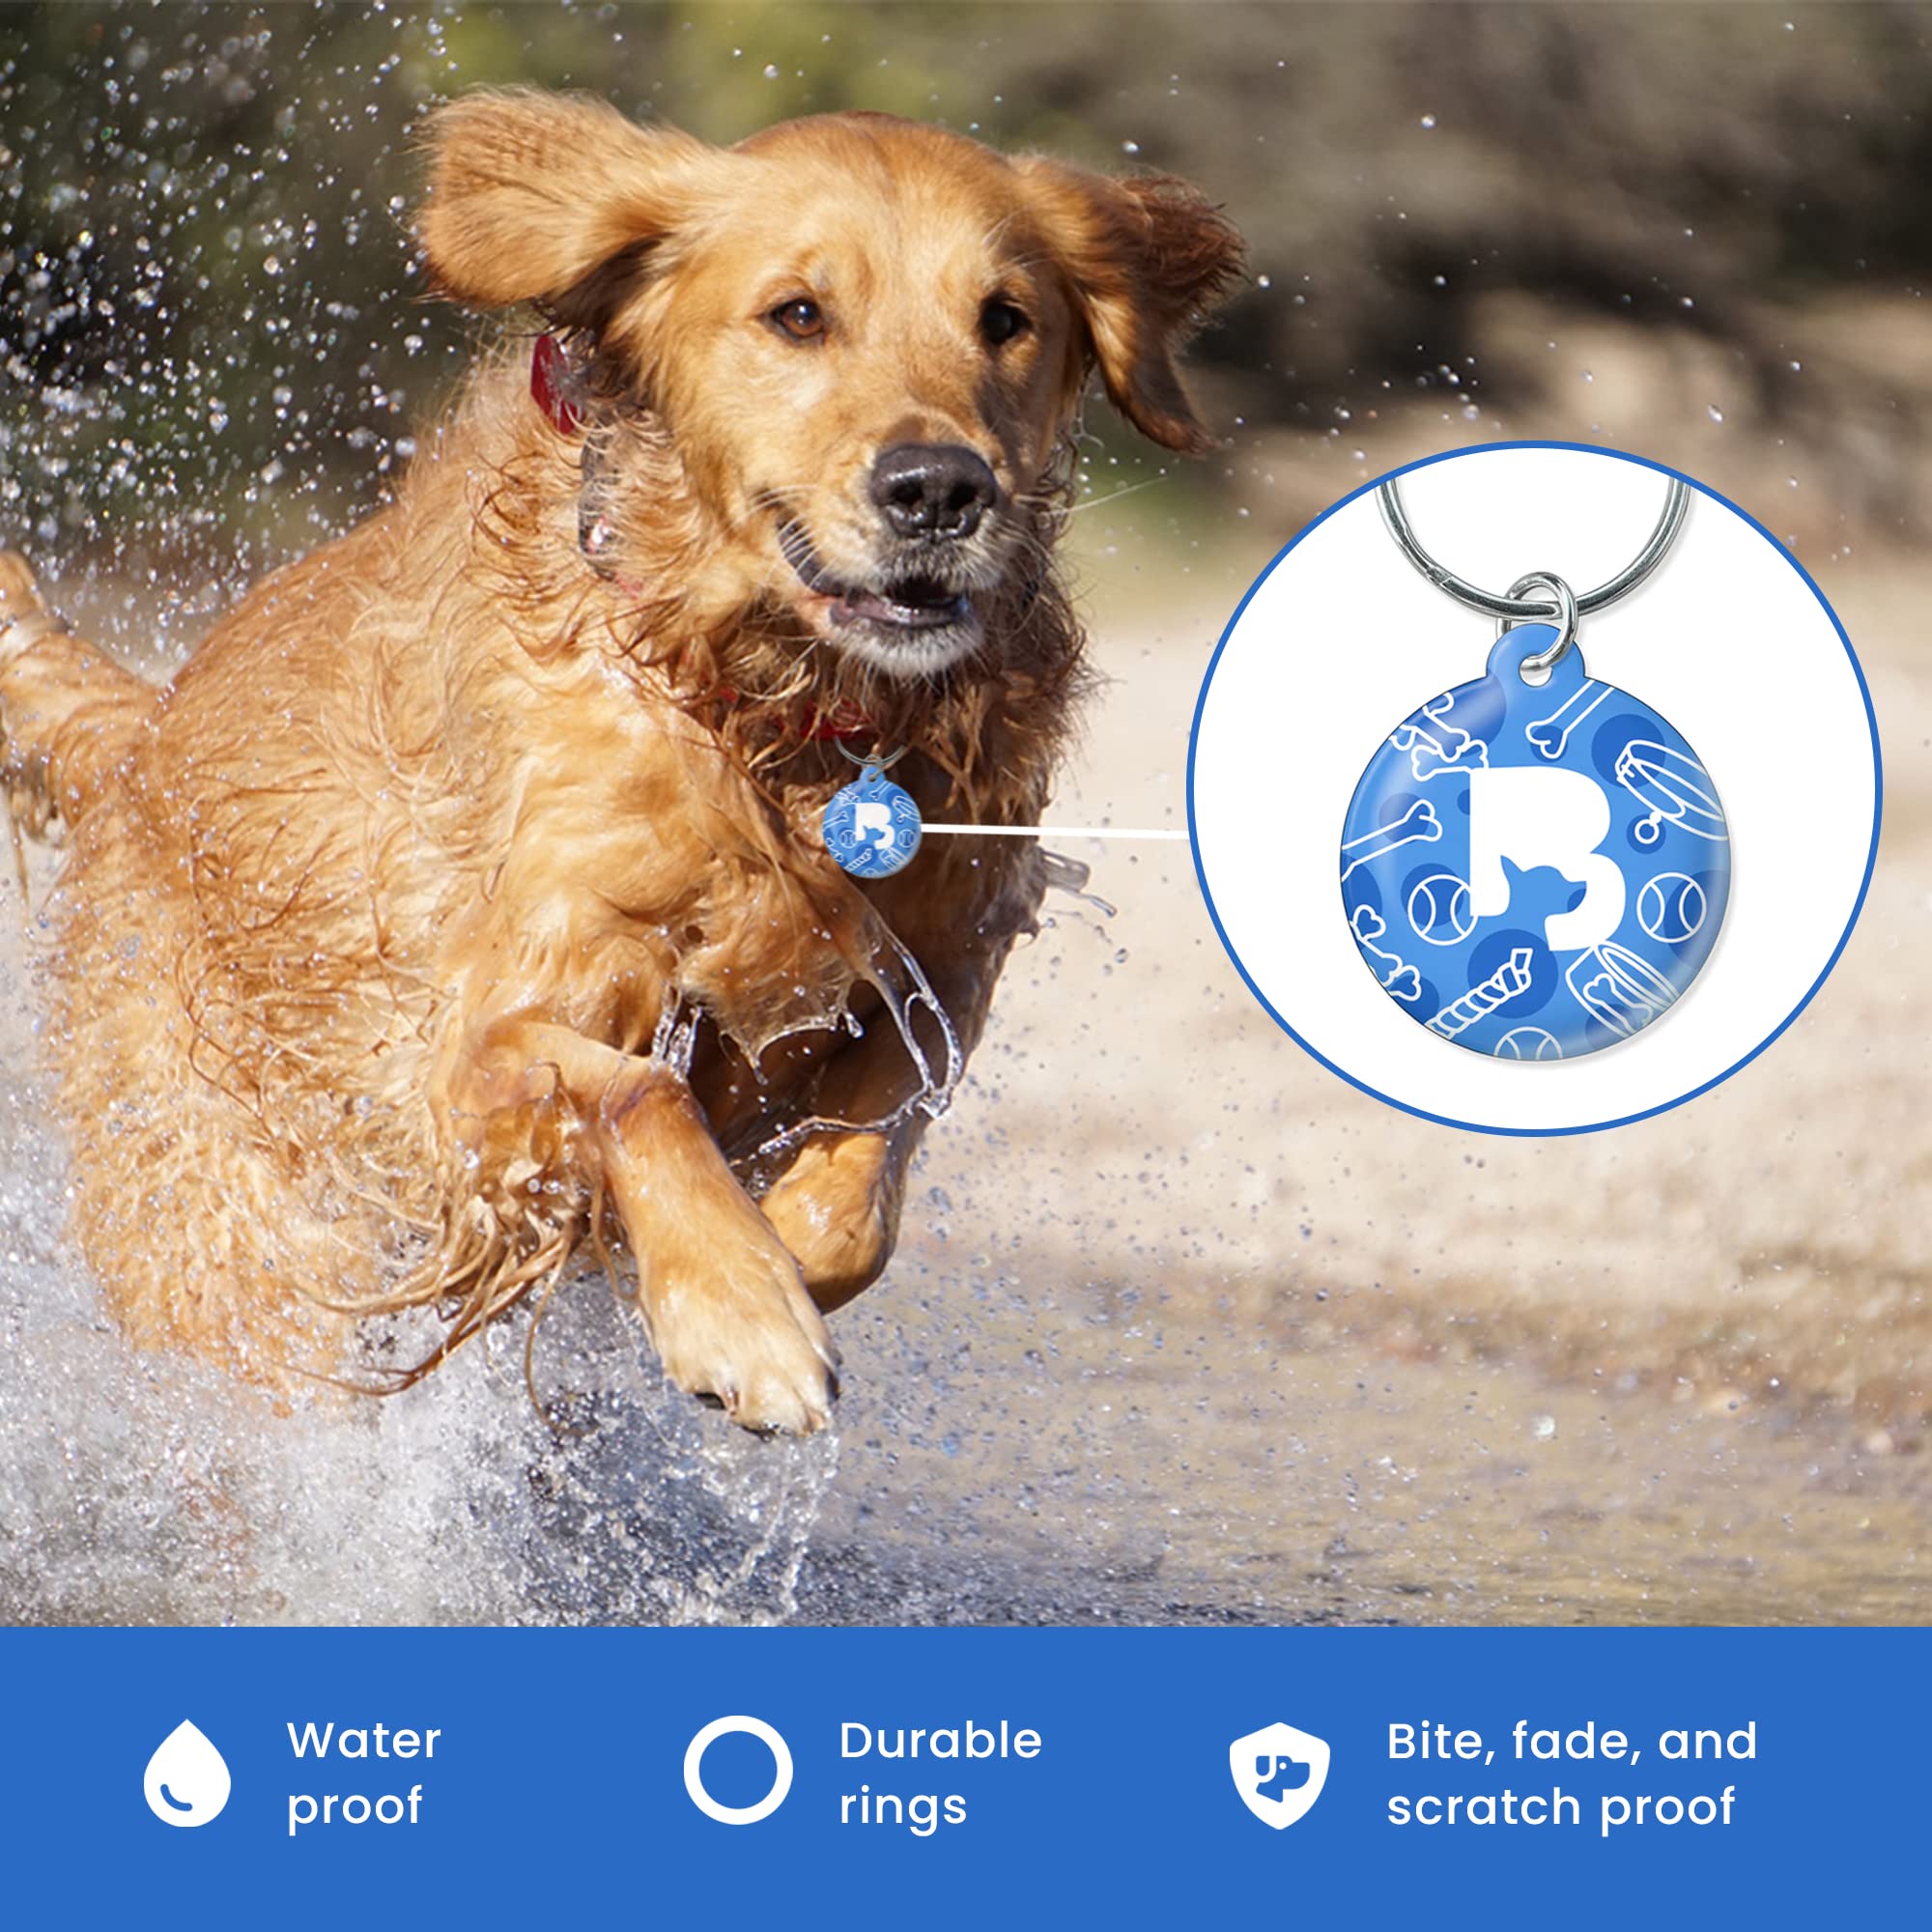 ByteTag QR Code Pet ID - Online Pet Profile - GPS Alerts - Unlimited Contact Information - Privacy Control (Woof Pack)